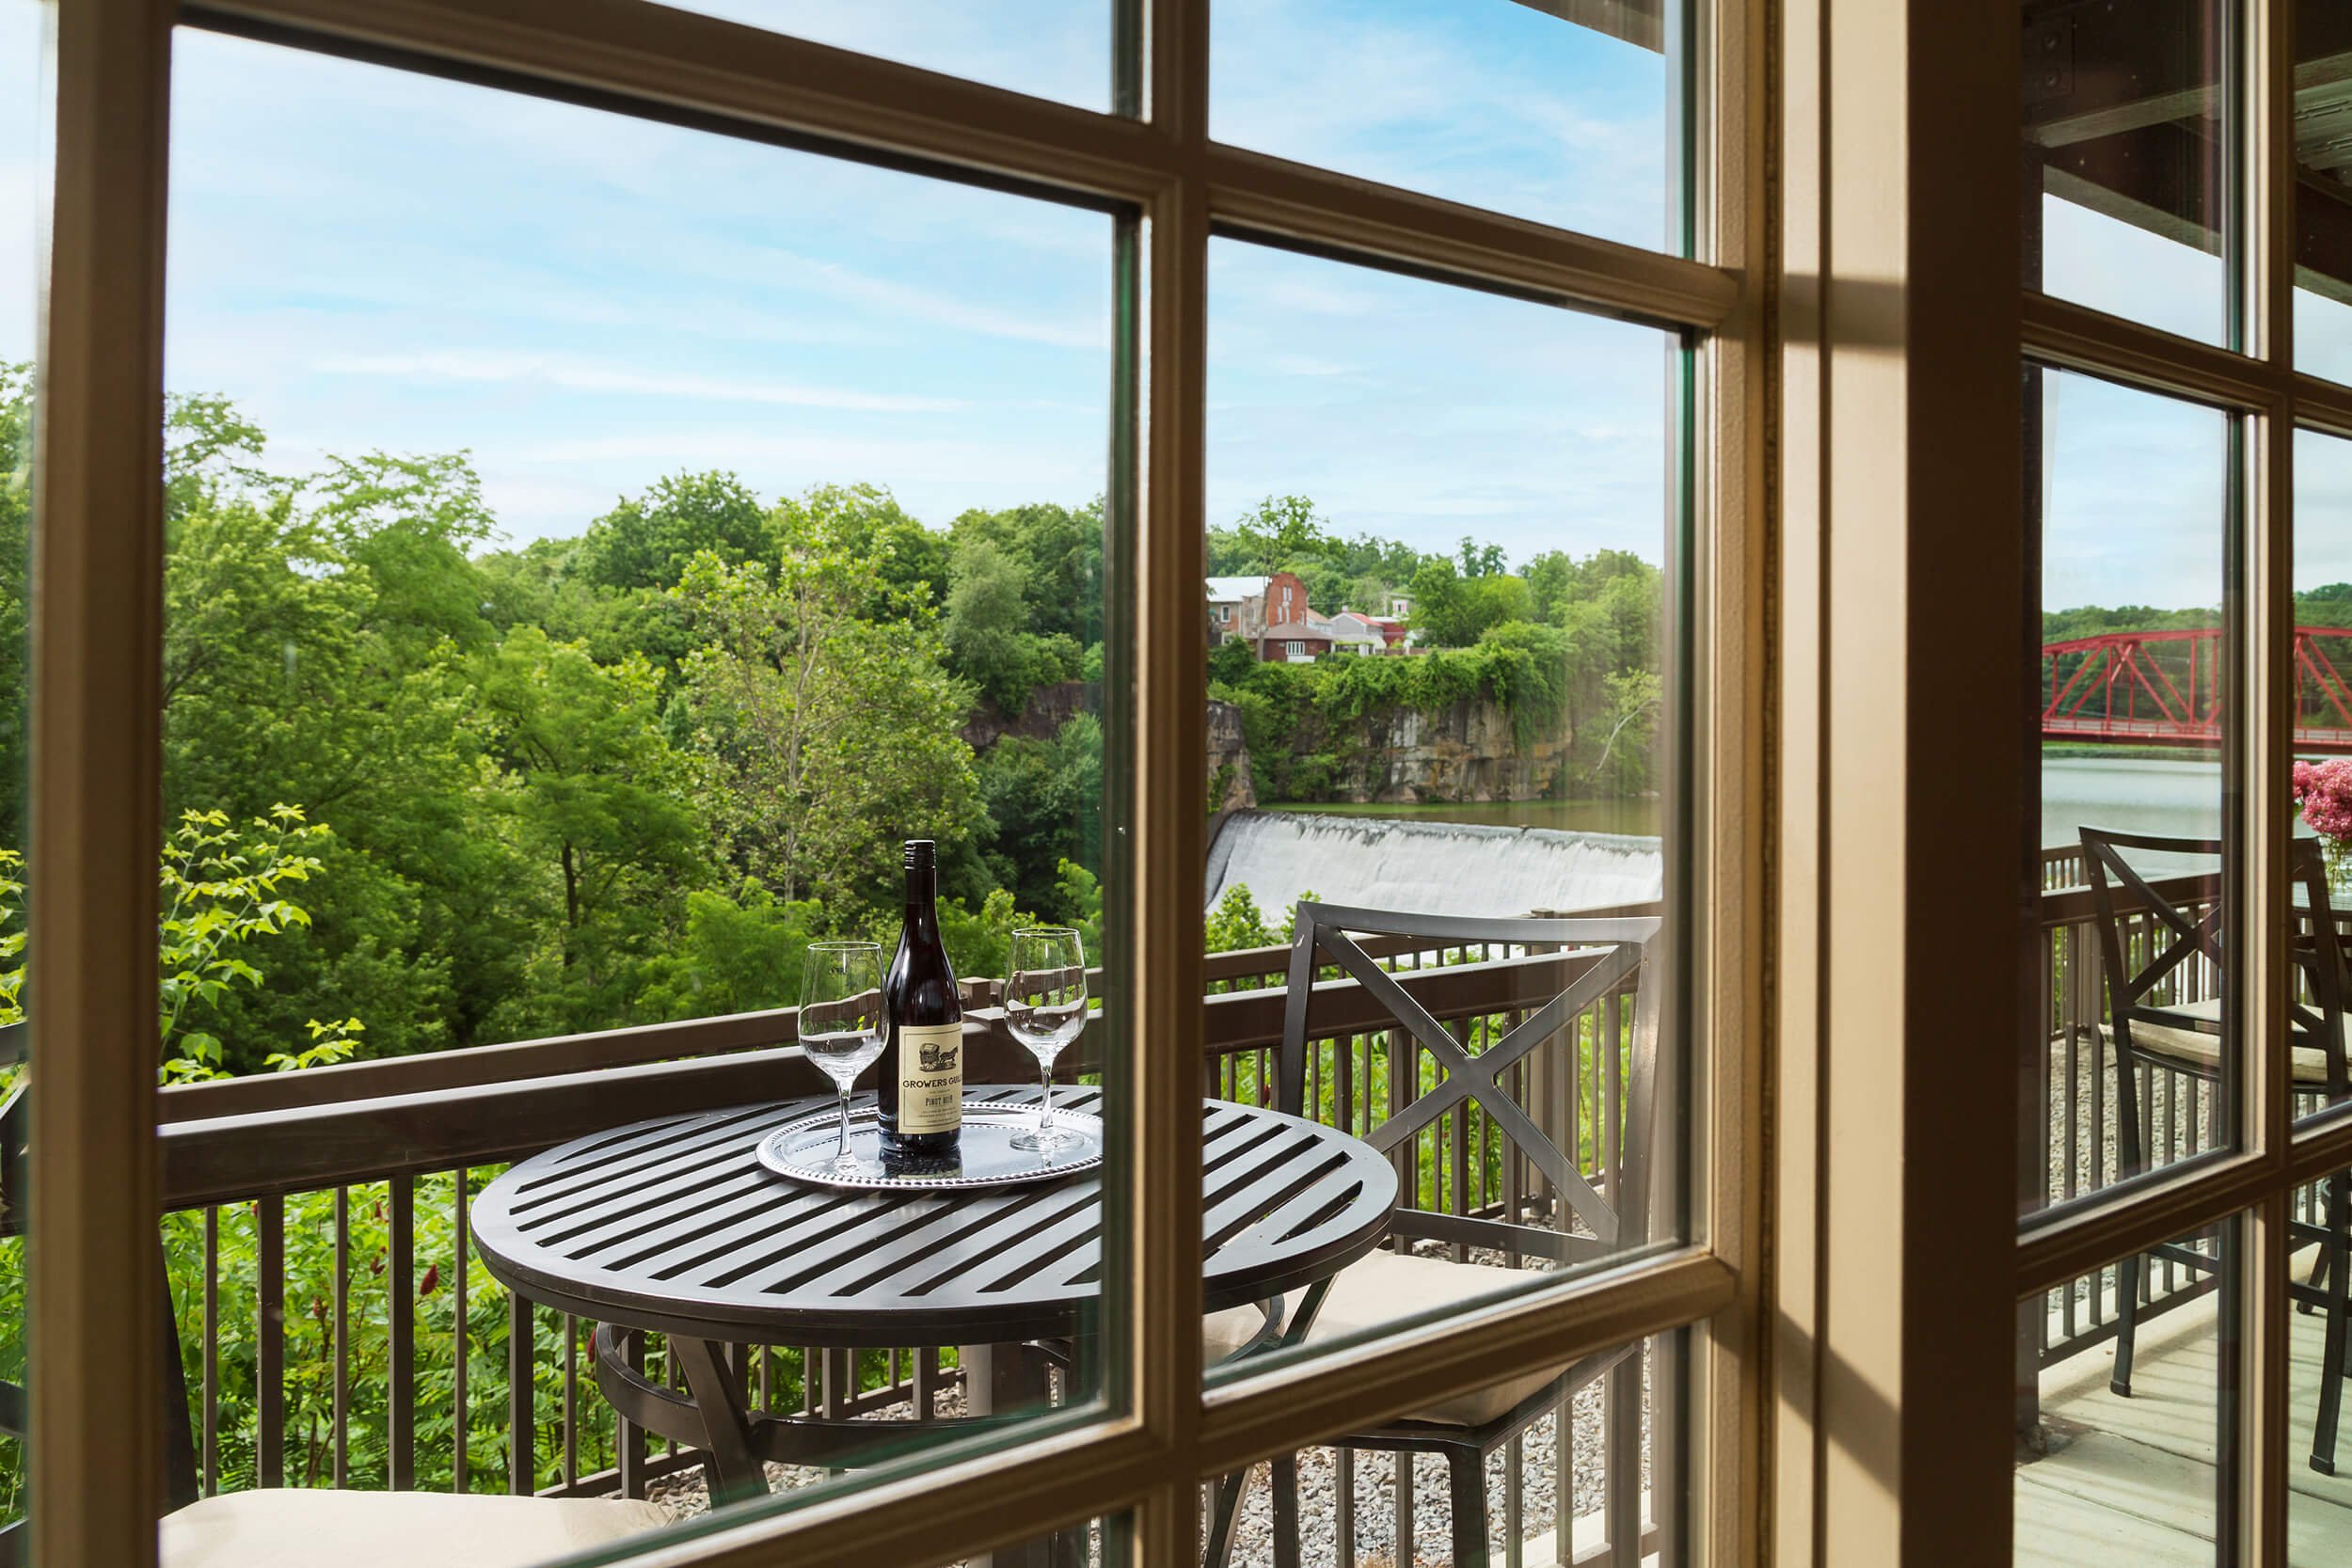 The balcony overlooking the Esopus Waterfall in the Esopus Suite at Diamond Mills hotel in Saugerties, NY